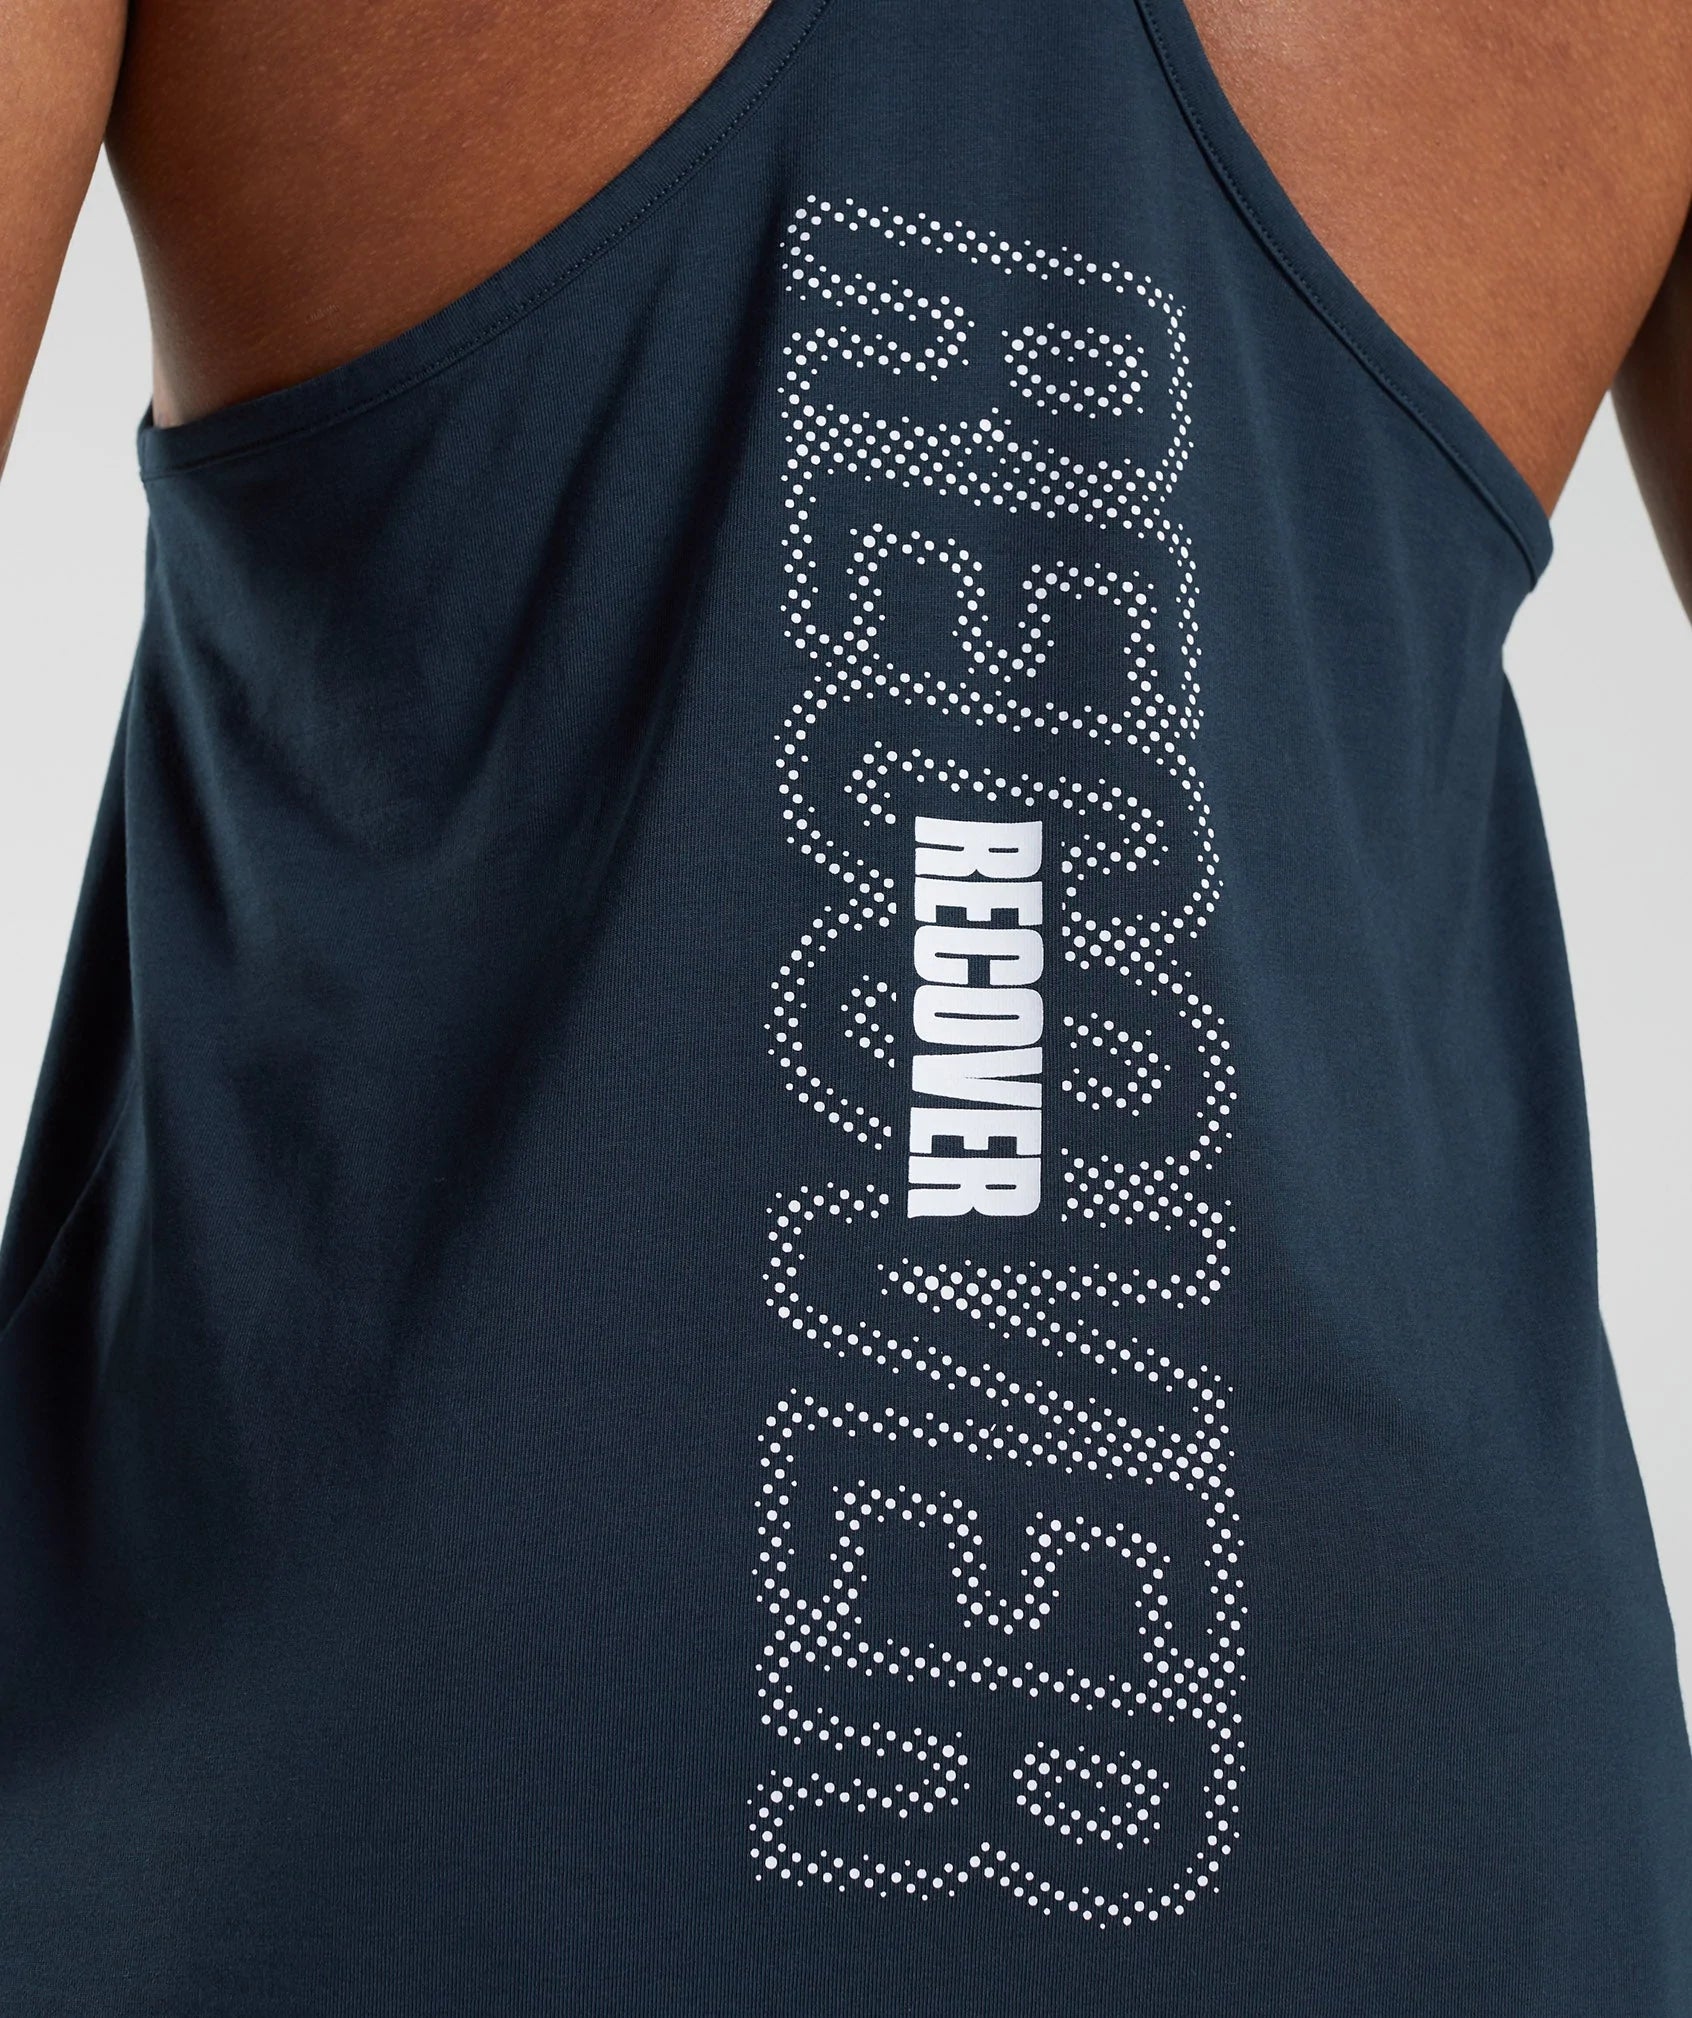 Recovery Graphic Stringer in Navy